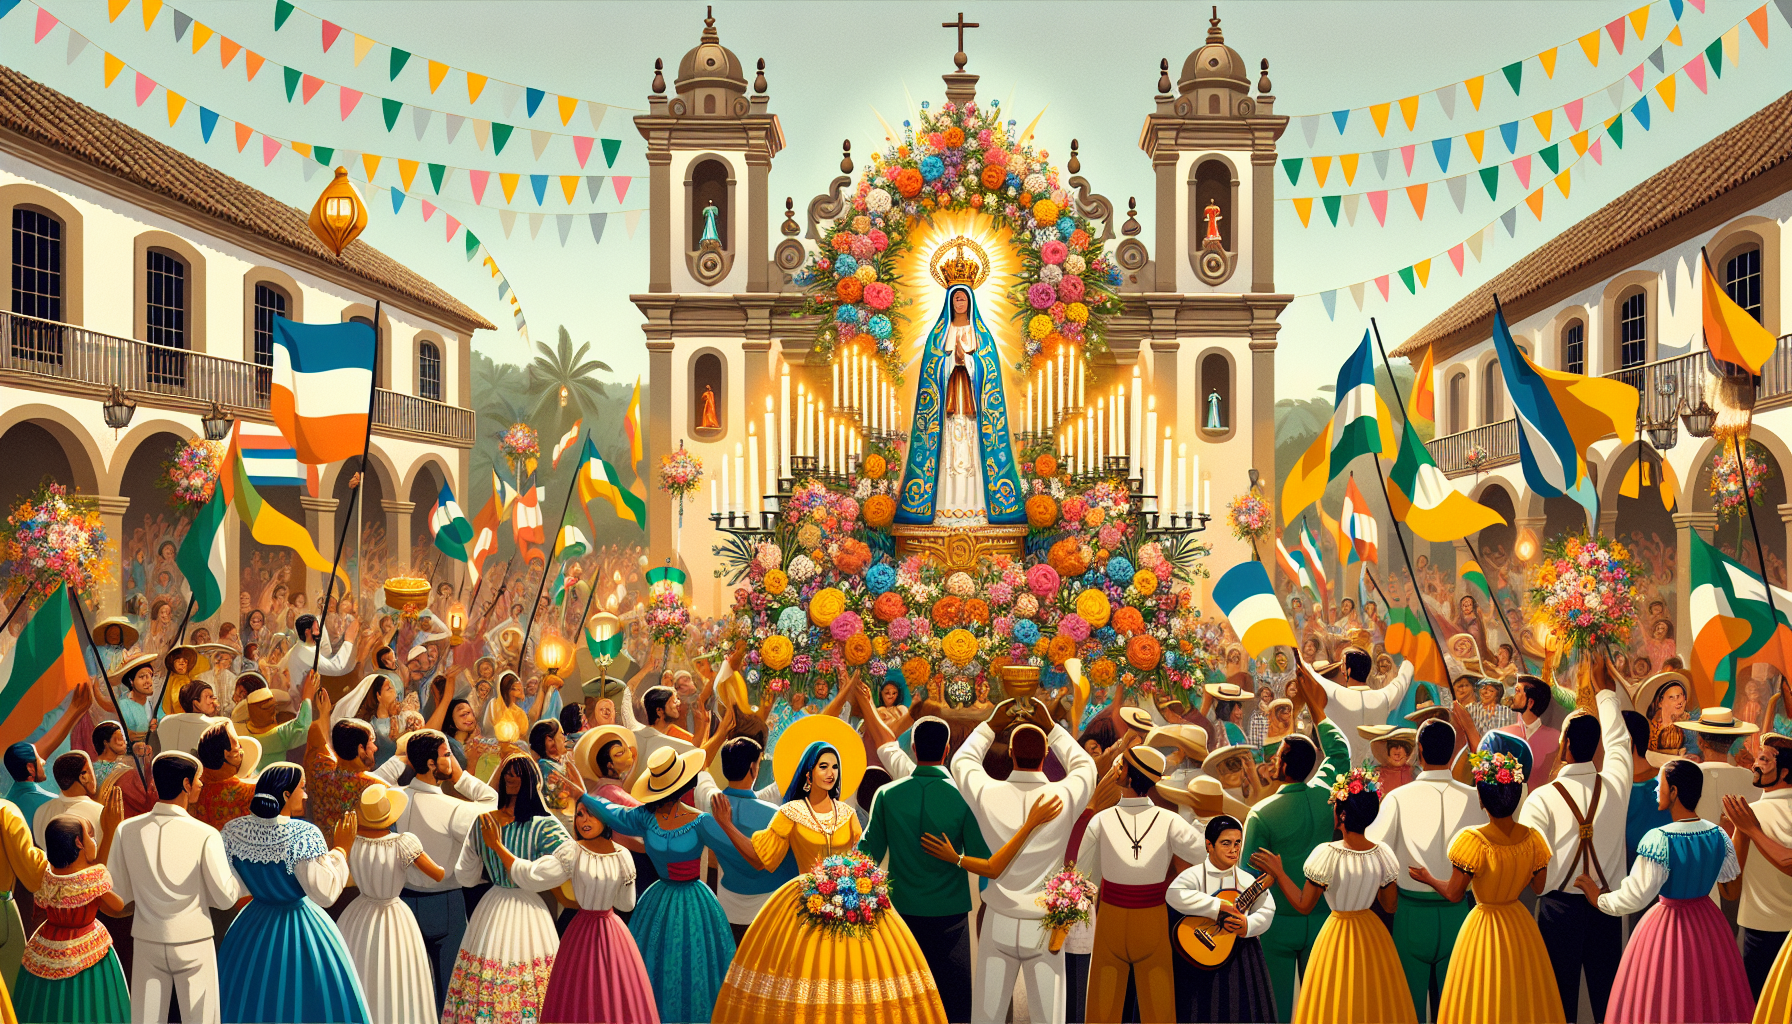 Create an image of a traditional Spanish festival celebrating the Nativity of the Virgin Mary. The scene should include an ornate, beautifully decorated church with a statue of the Virgin Mary surroun